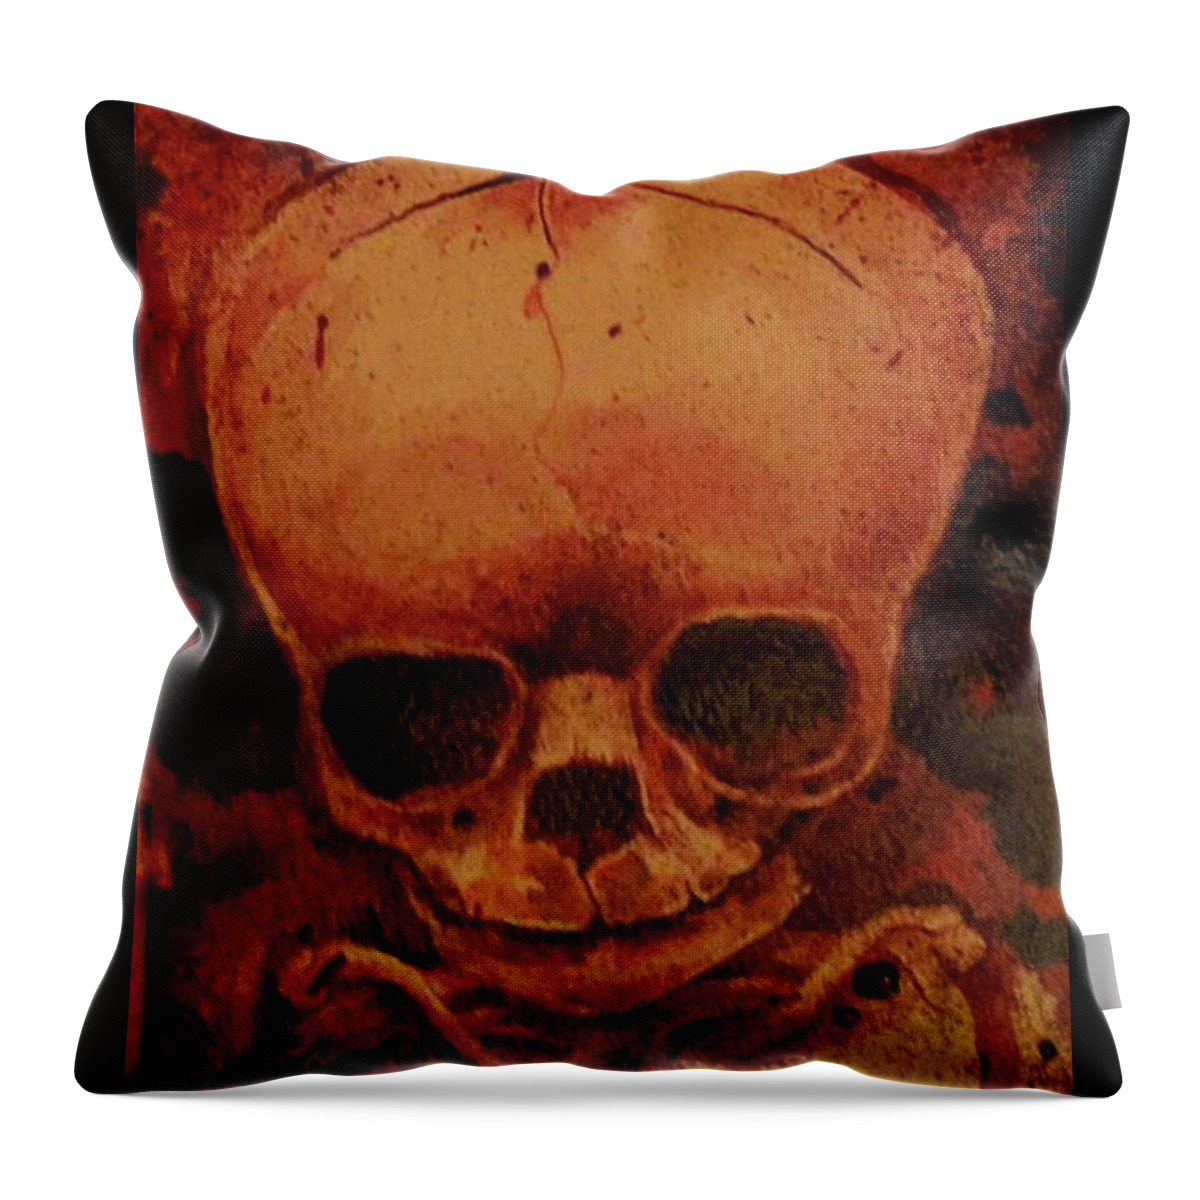 Ryanalmighty Throw Pillow featuring the painting Fetus Skeleton #1 by Ryan Almighty